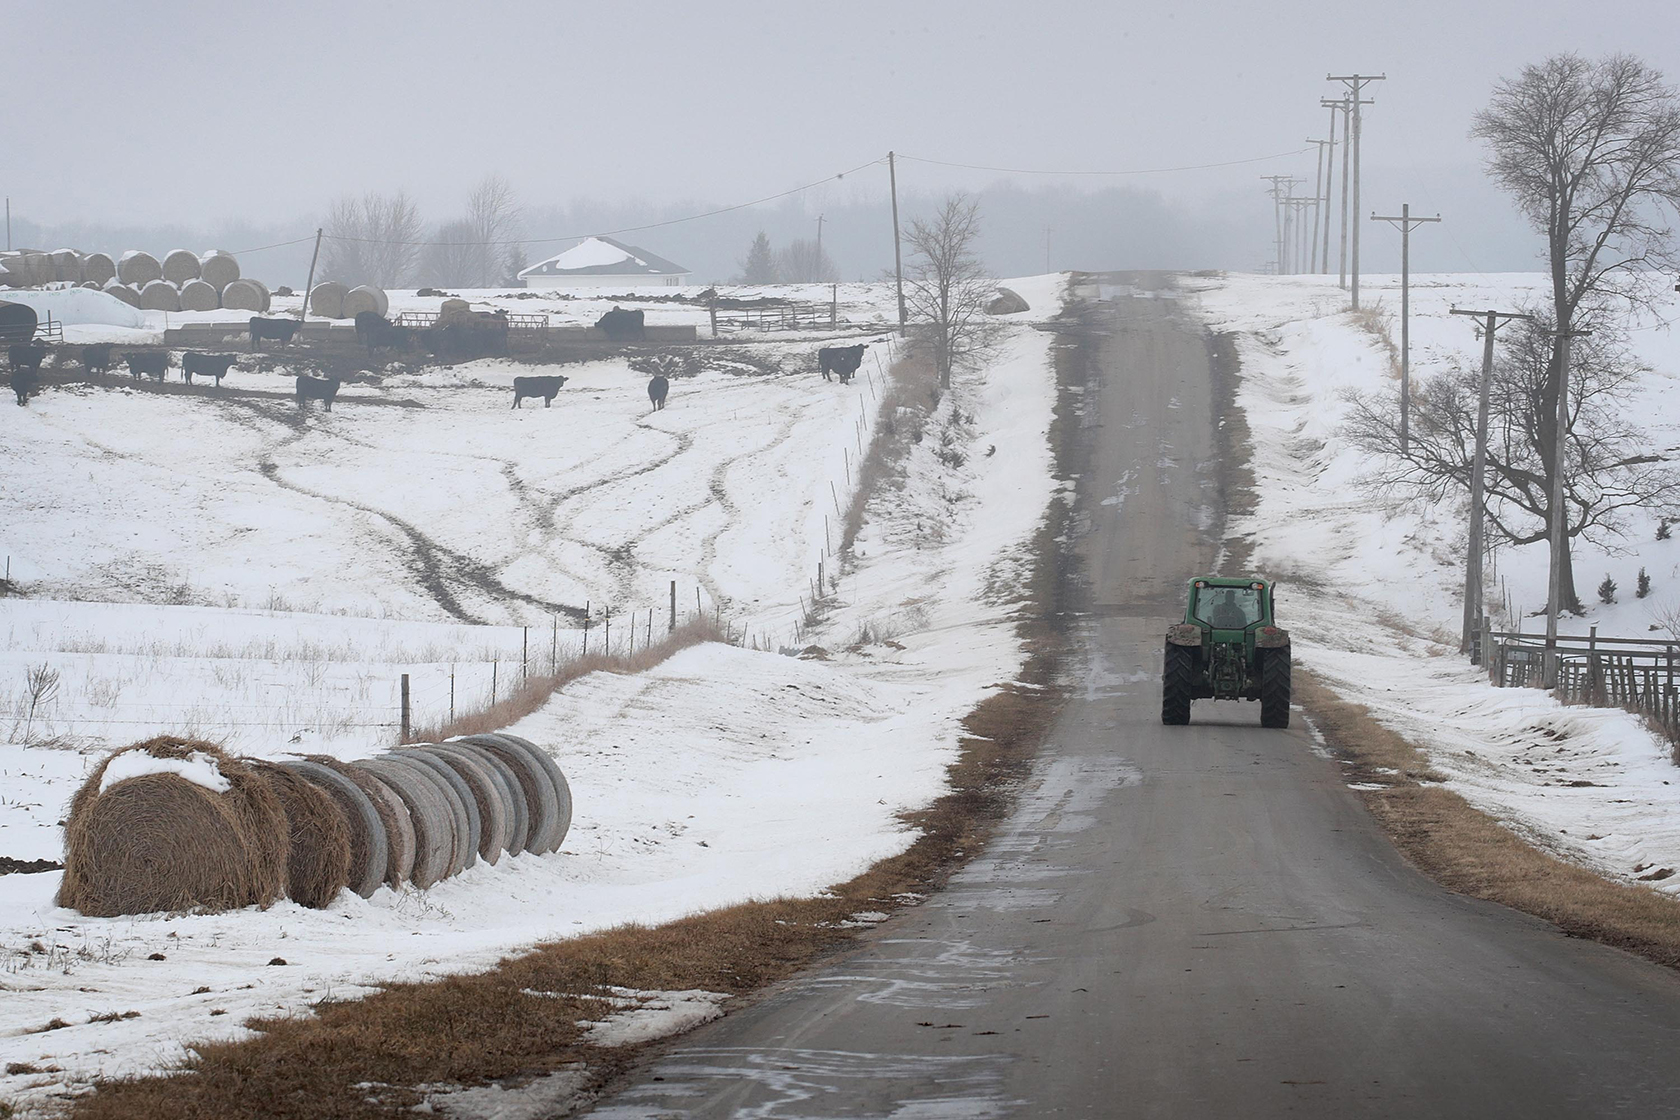 A tractor drives down a rural road in winter.